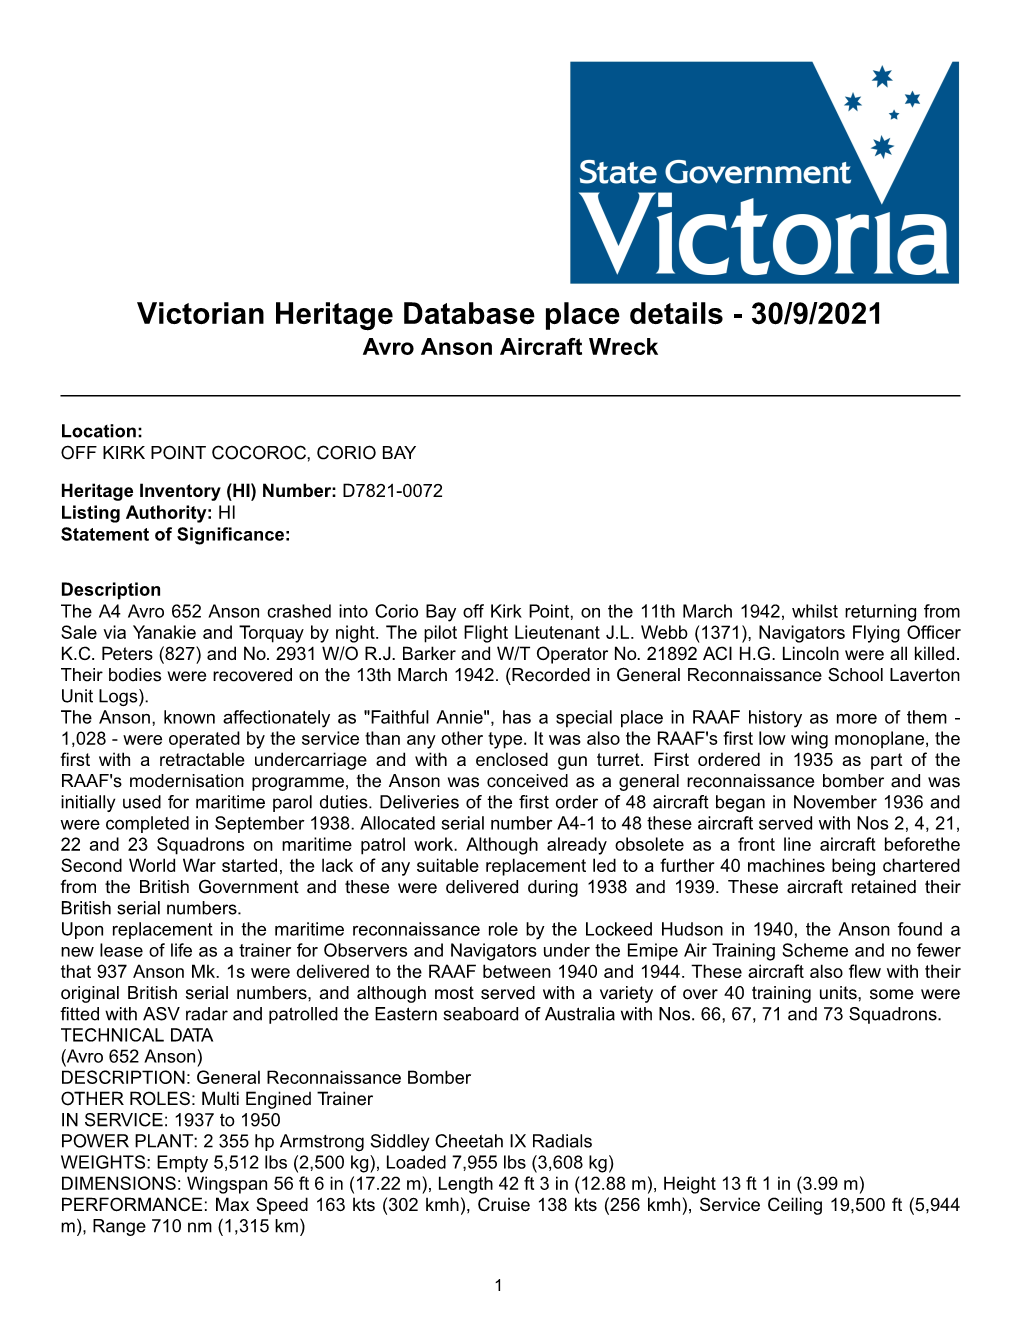 Victorian Heritage Database Place Details - 30/9/2021 Avro Anson Aircraft Wreck